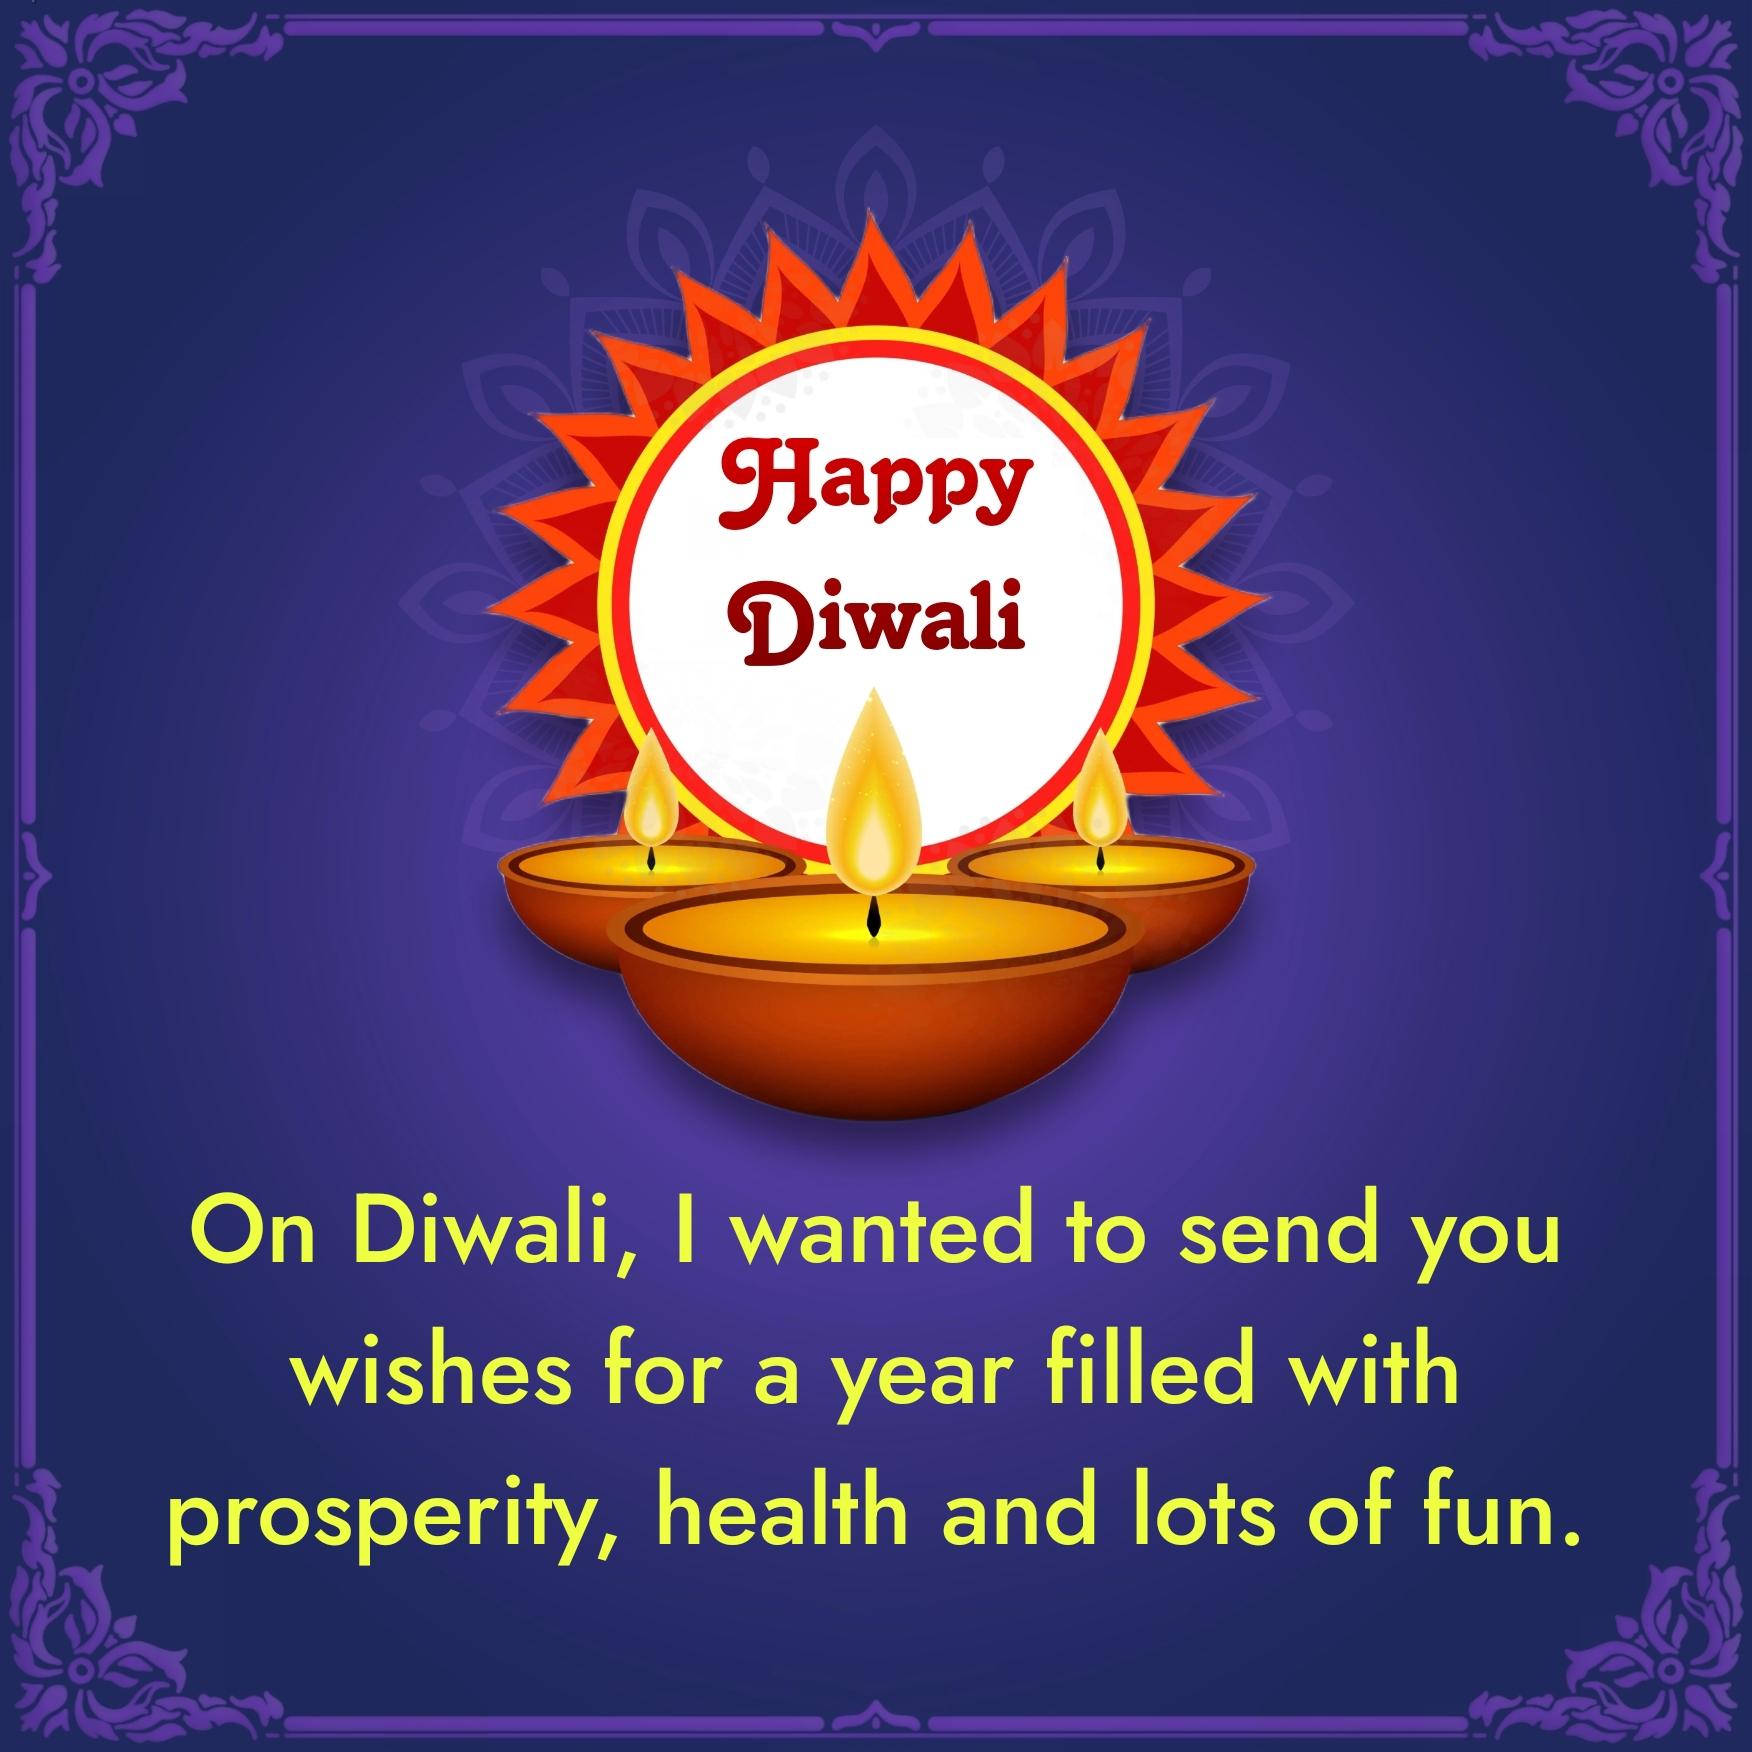 On Diwali I wanted to send you wishes for a year